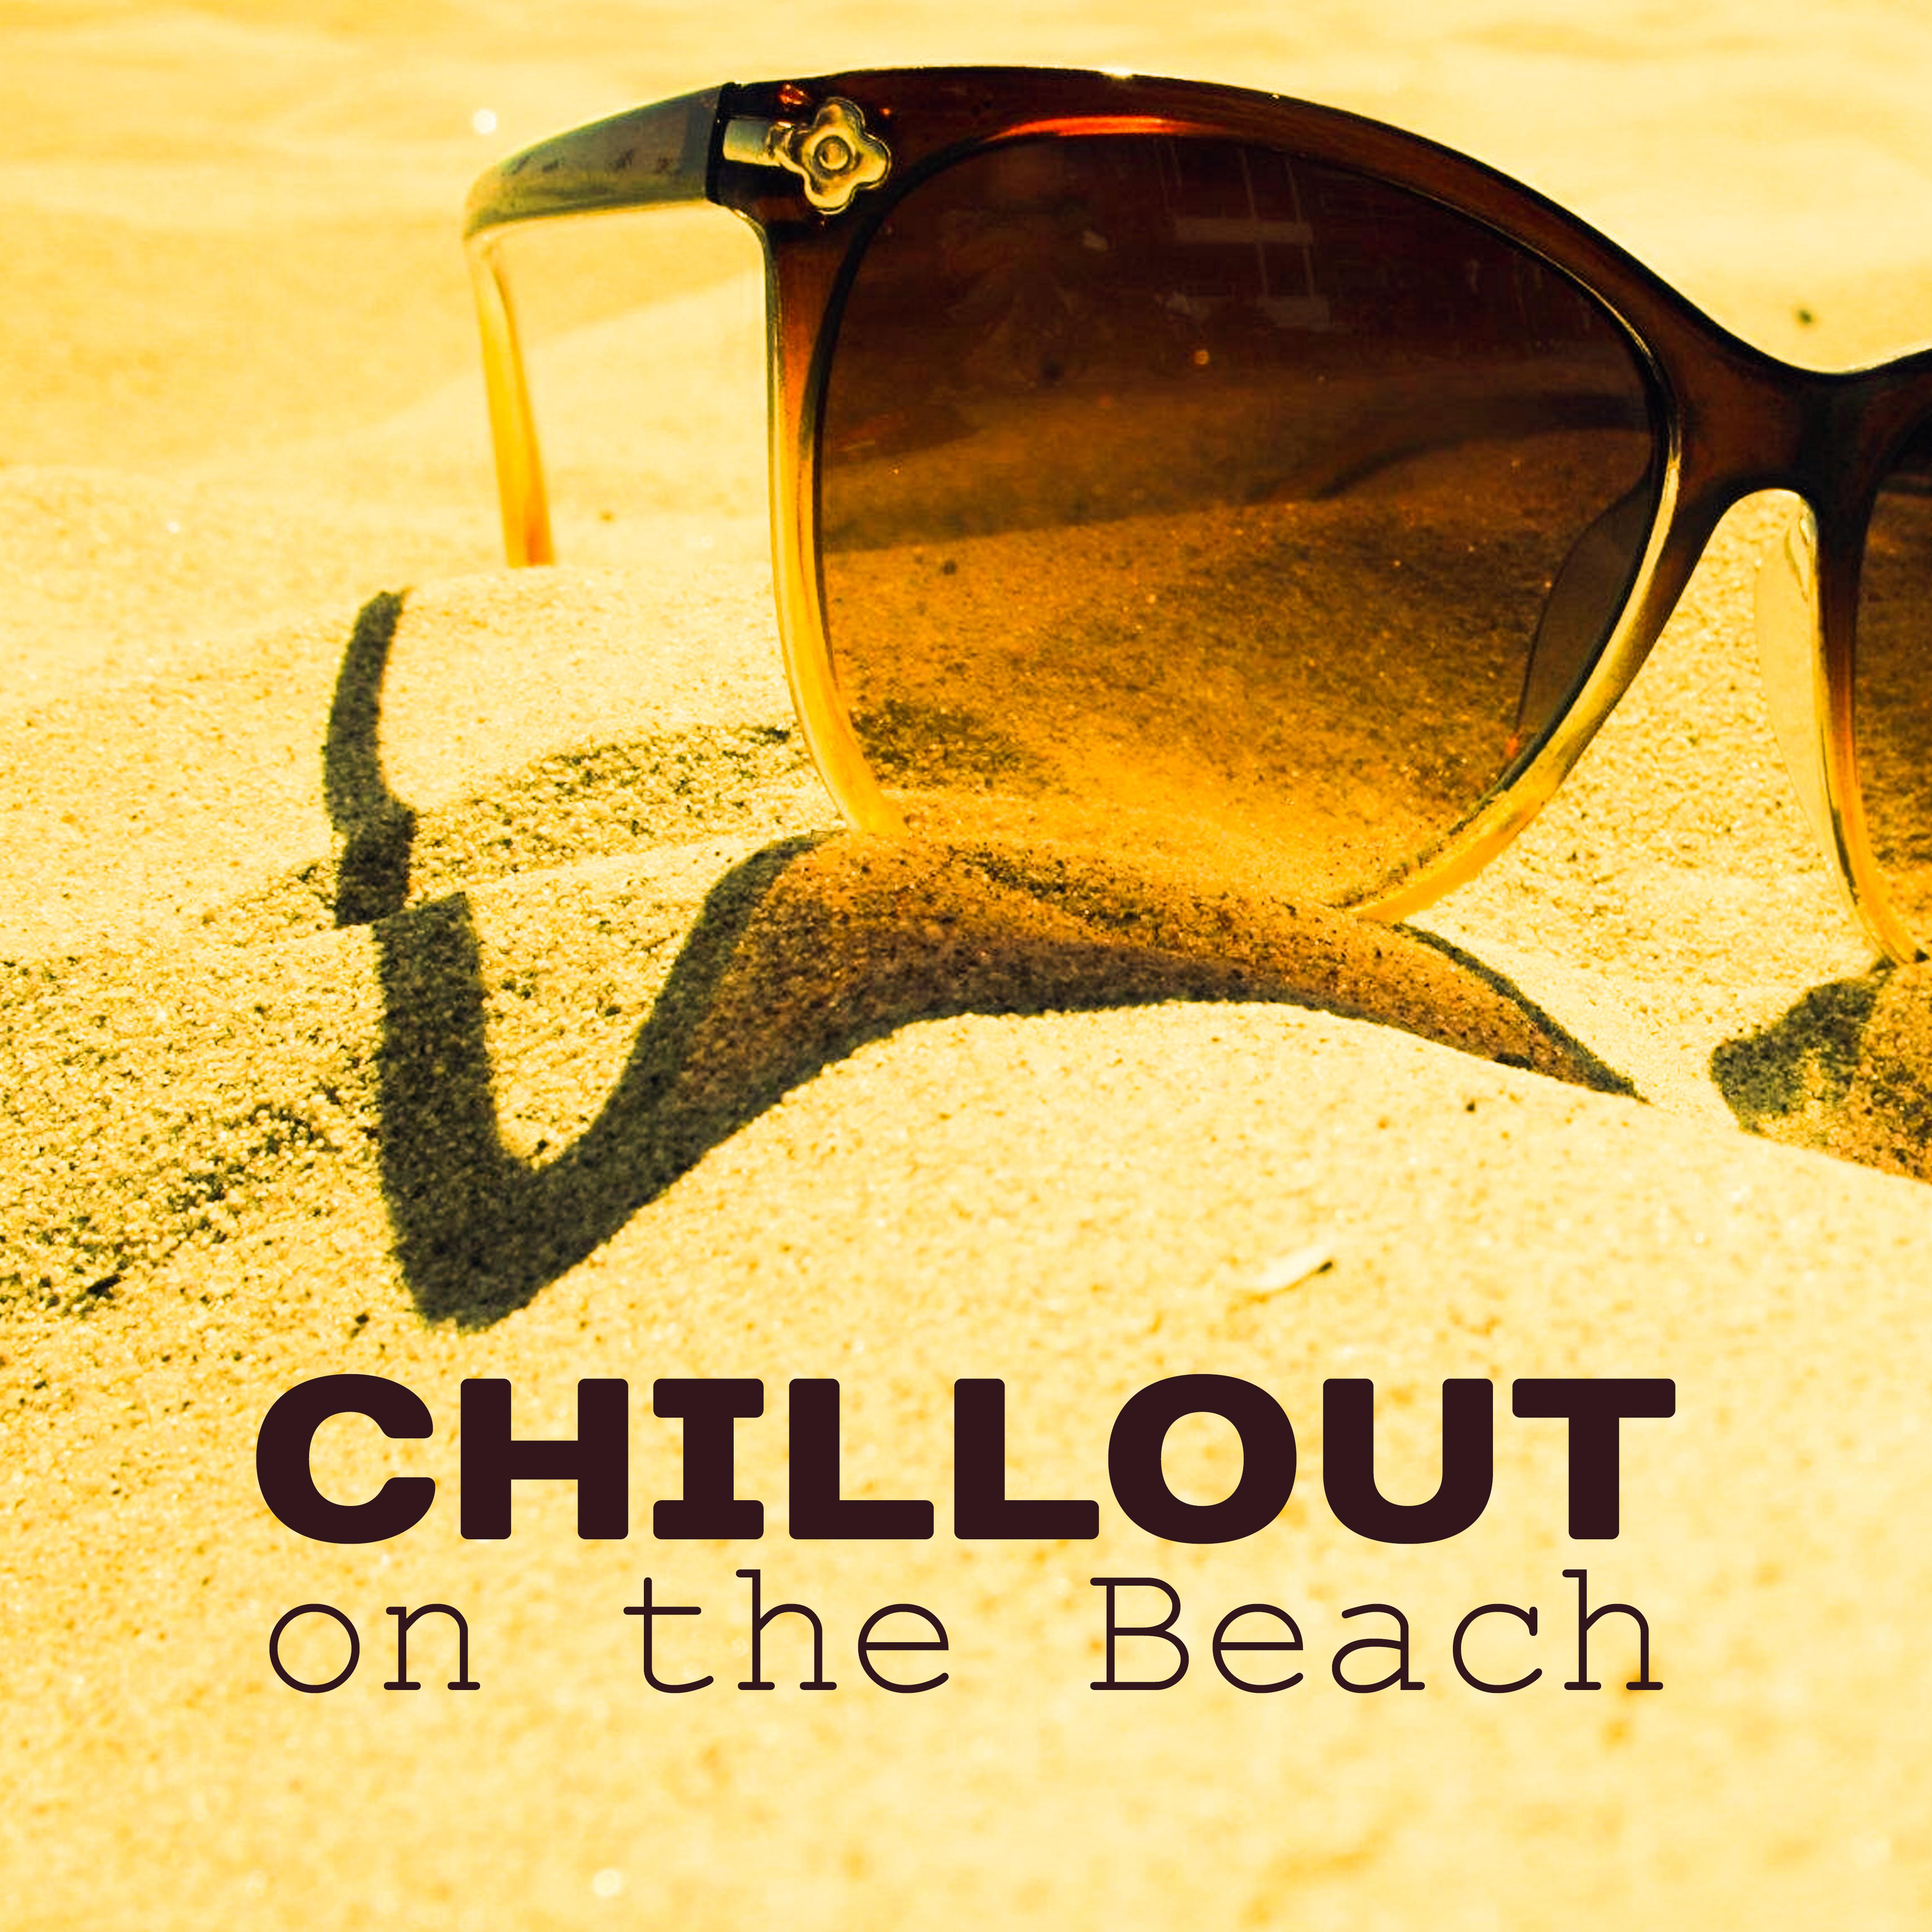 Chillout on the Beach  Holiday Songs, Summer Chill, Calm Down, Stress Free, Sunshine, Chillout Lounge, Ibiza Chill, Beach Music